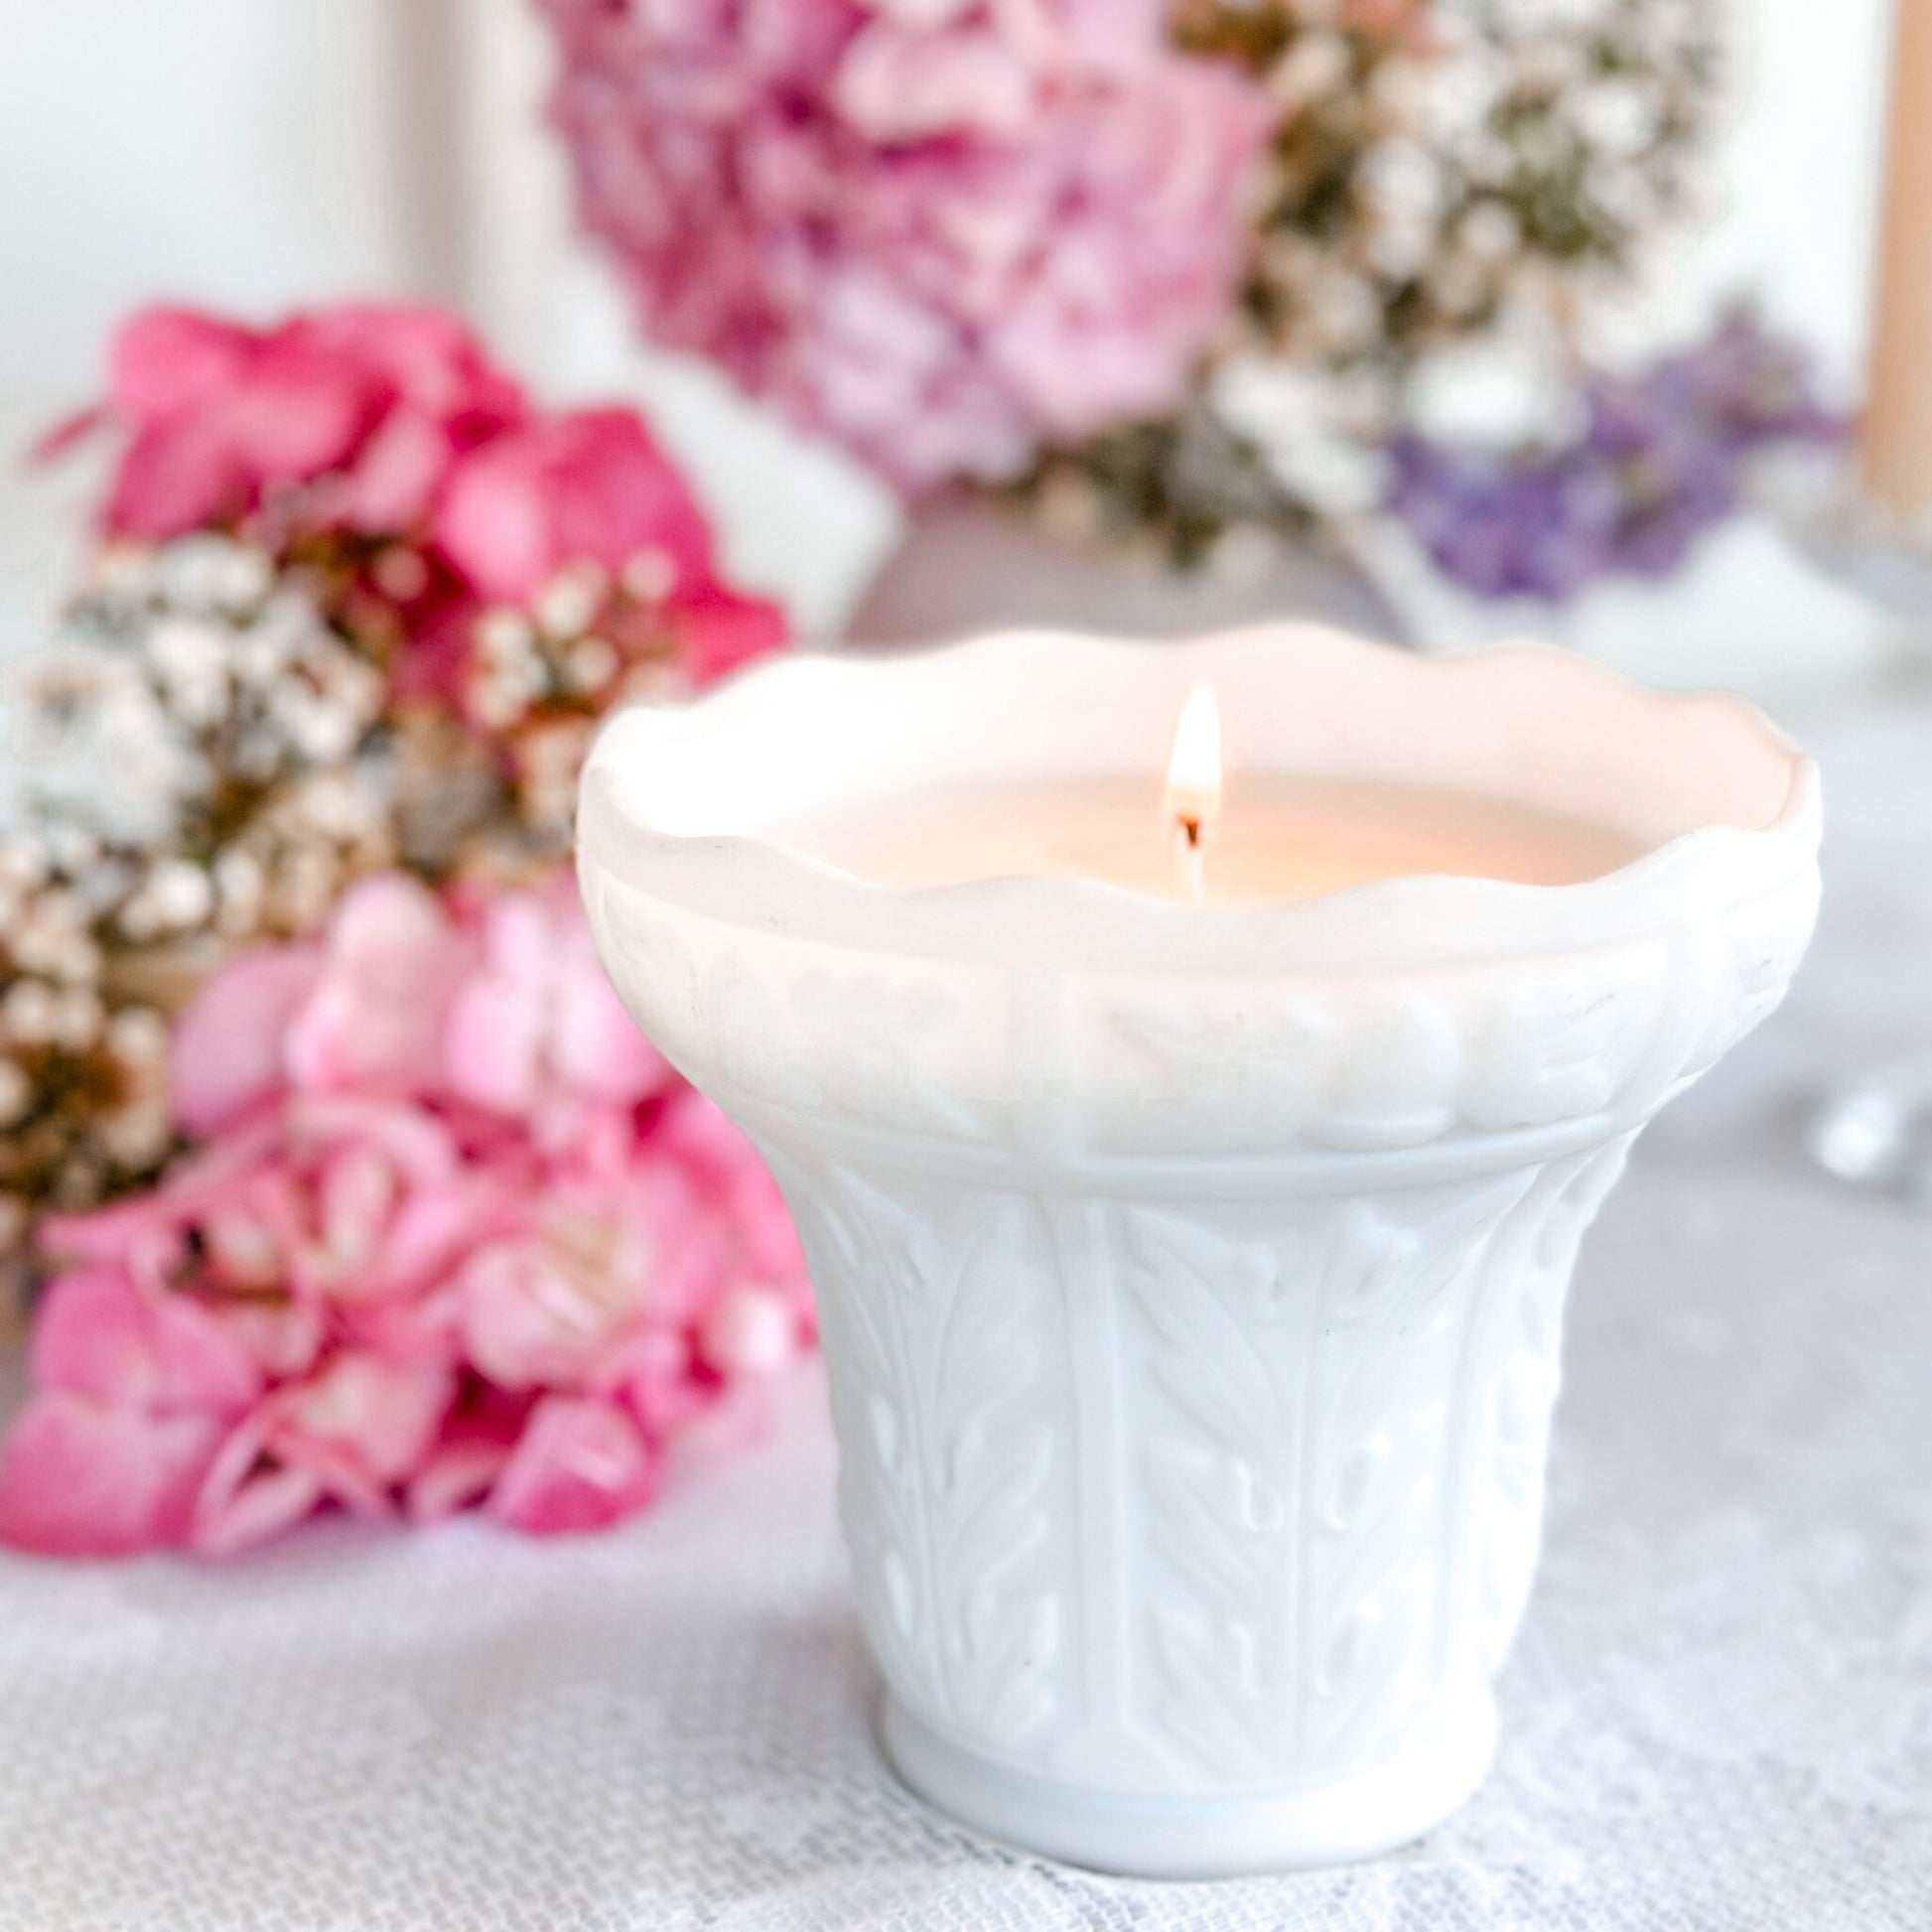 Unique Candle, Soy Candle, Milk Glass, Gift For Best Friend